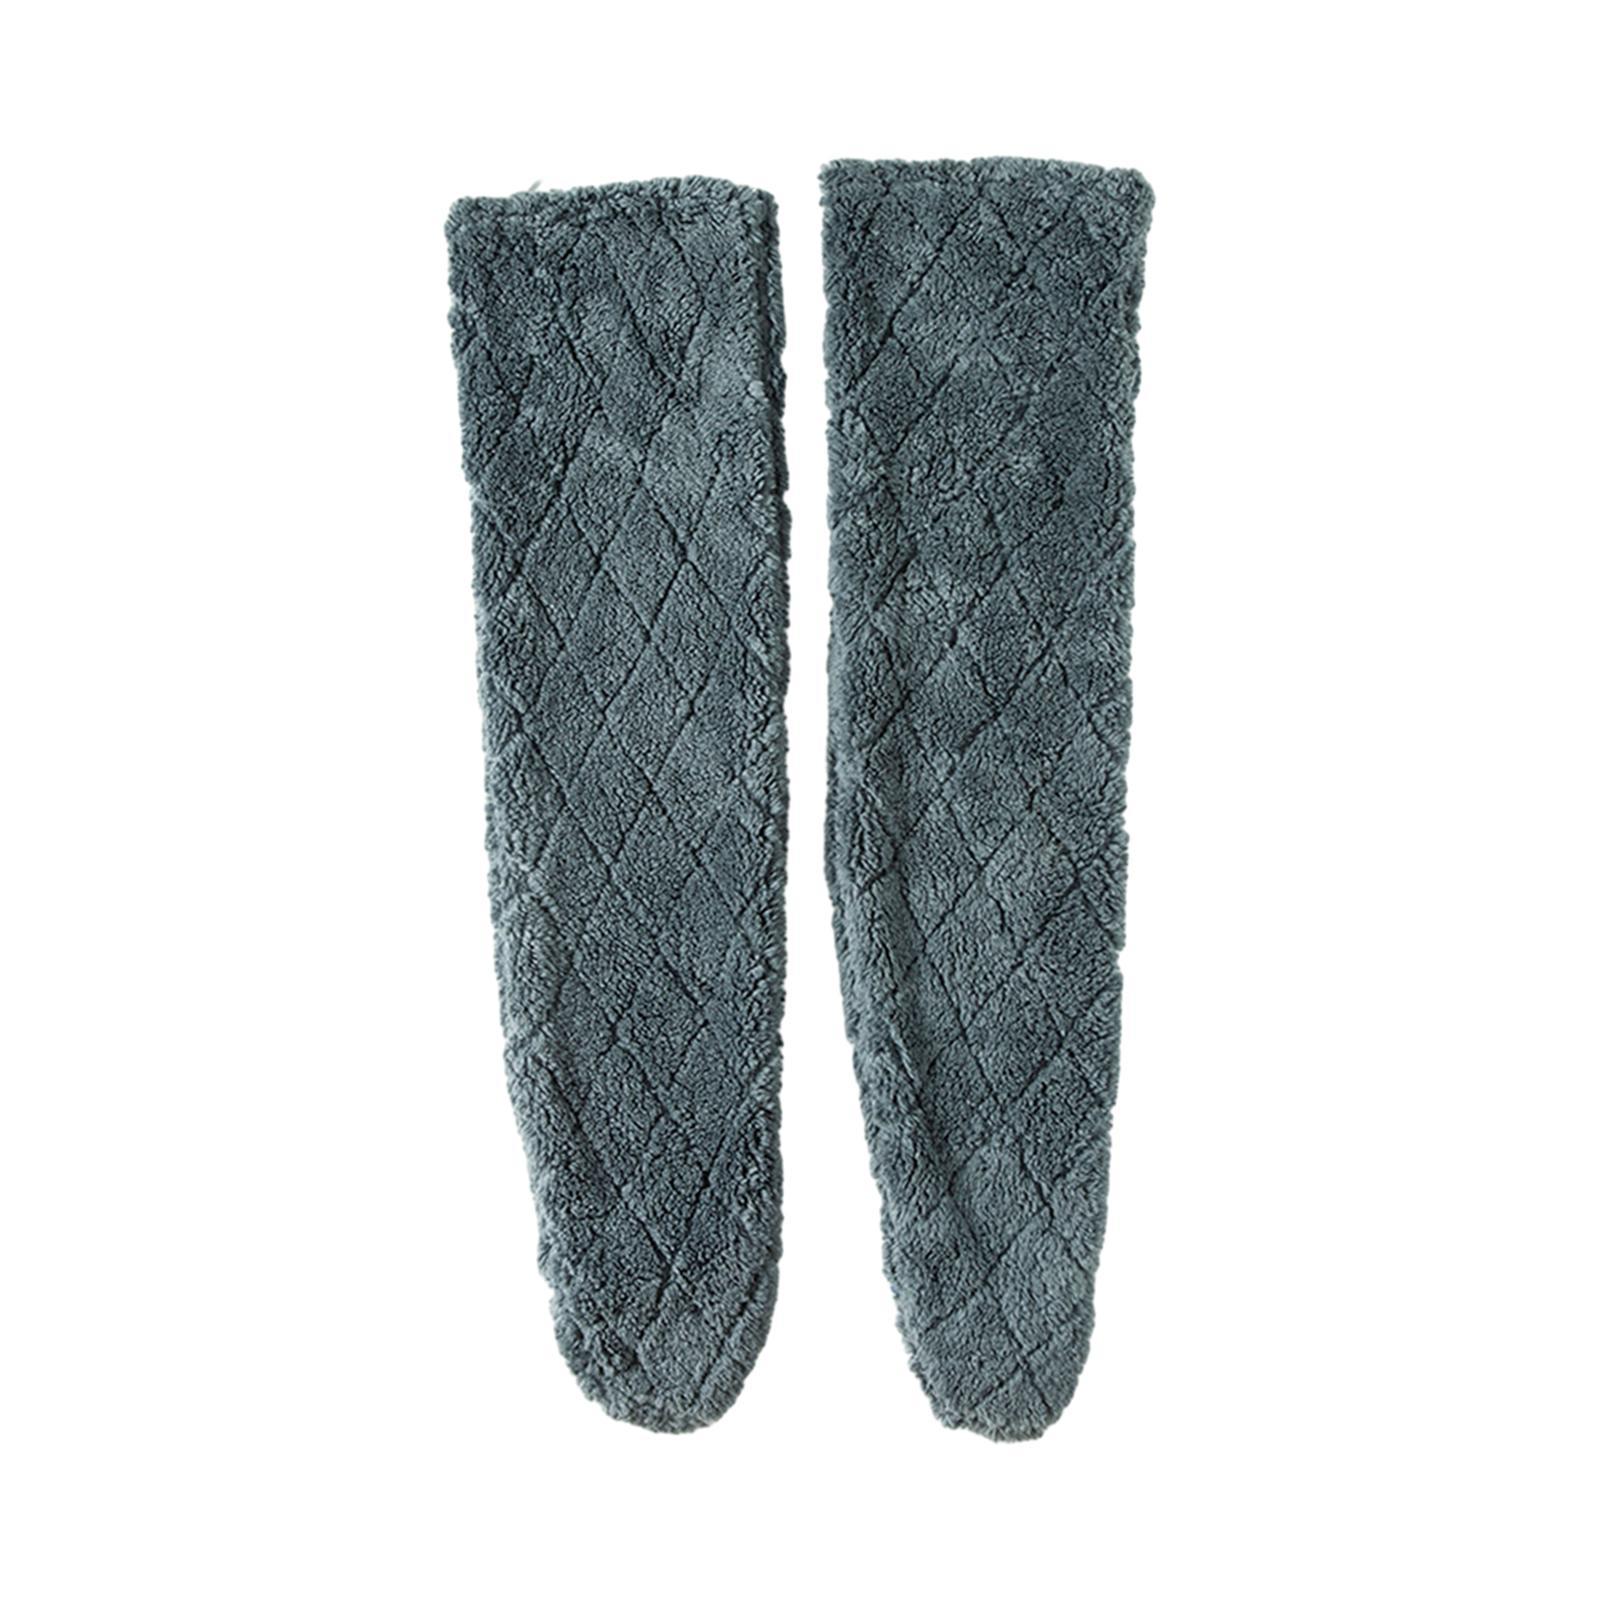 over Knee High Fuzzy Socks Lady Thigh High Socks for Home Office Living Room